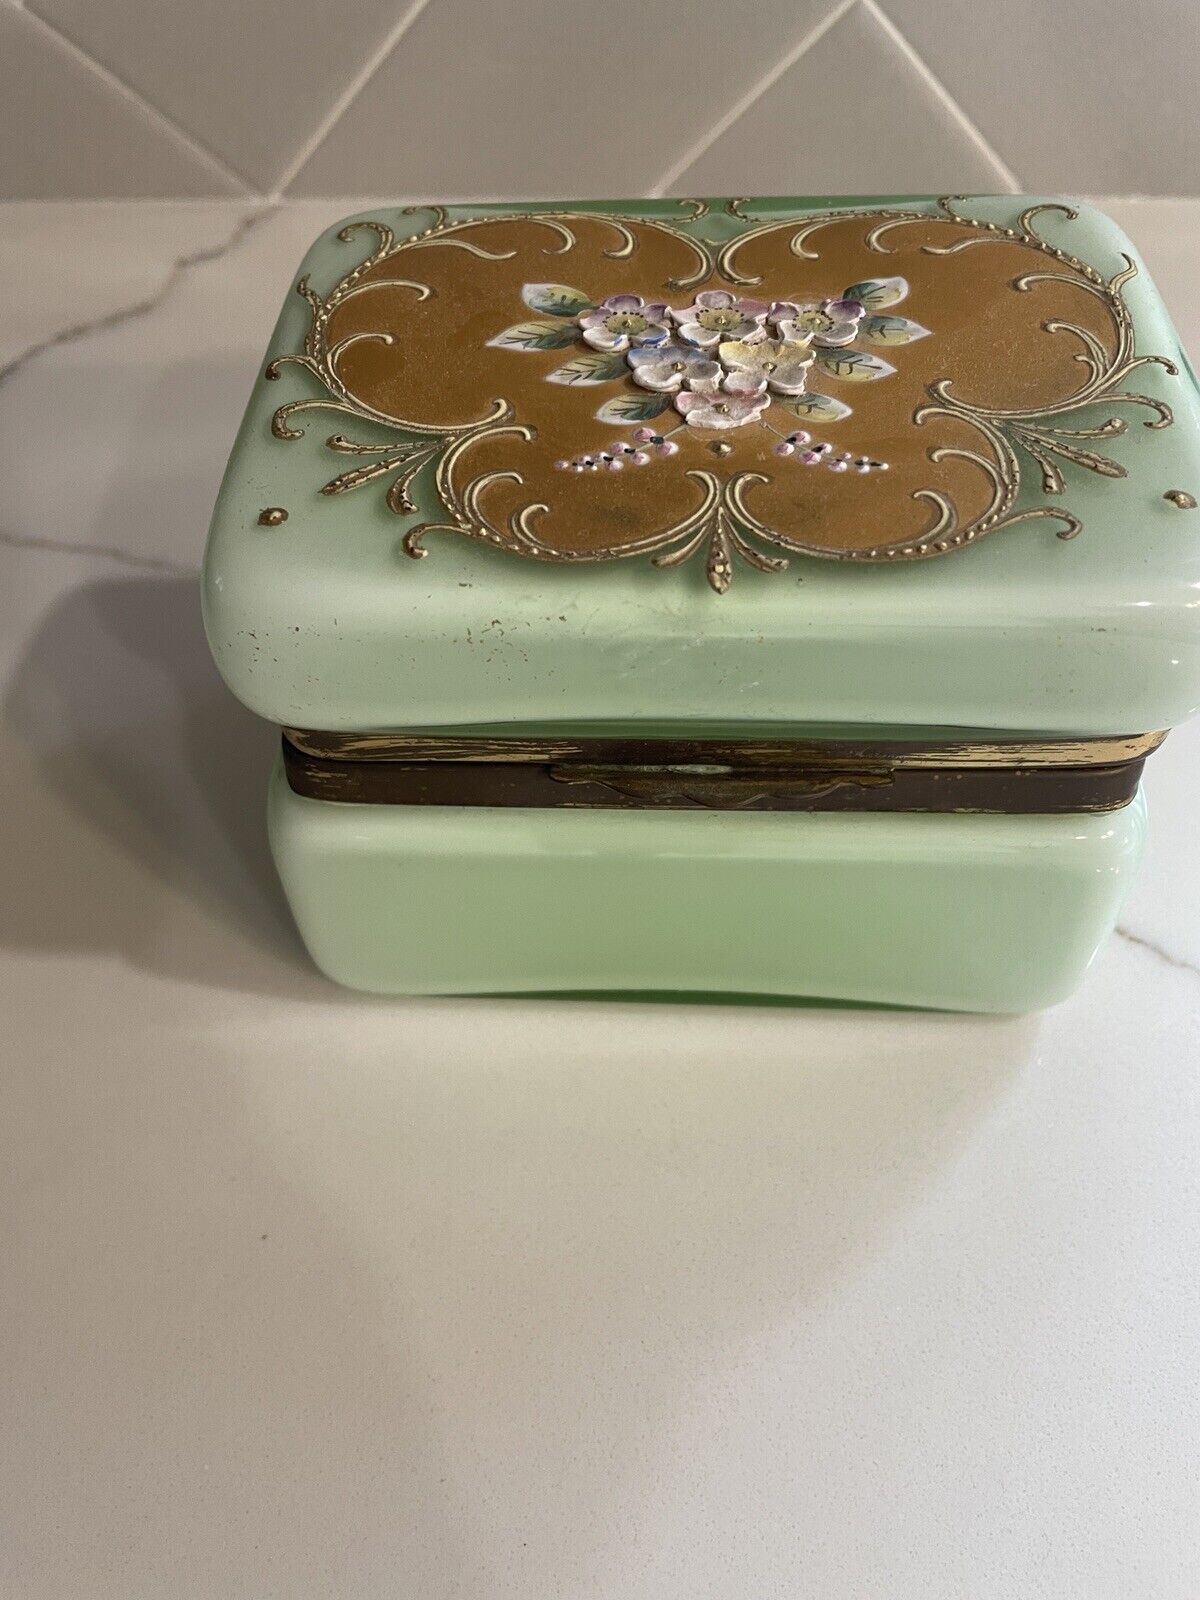 Antique Green Opaline Trinket Box Made In Germany US Zone Brass Accents